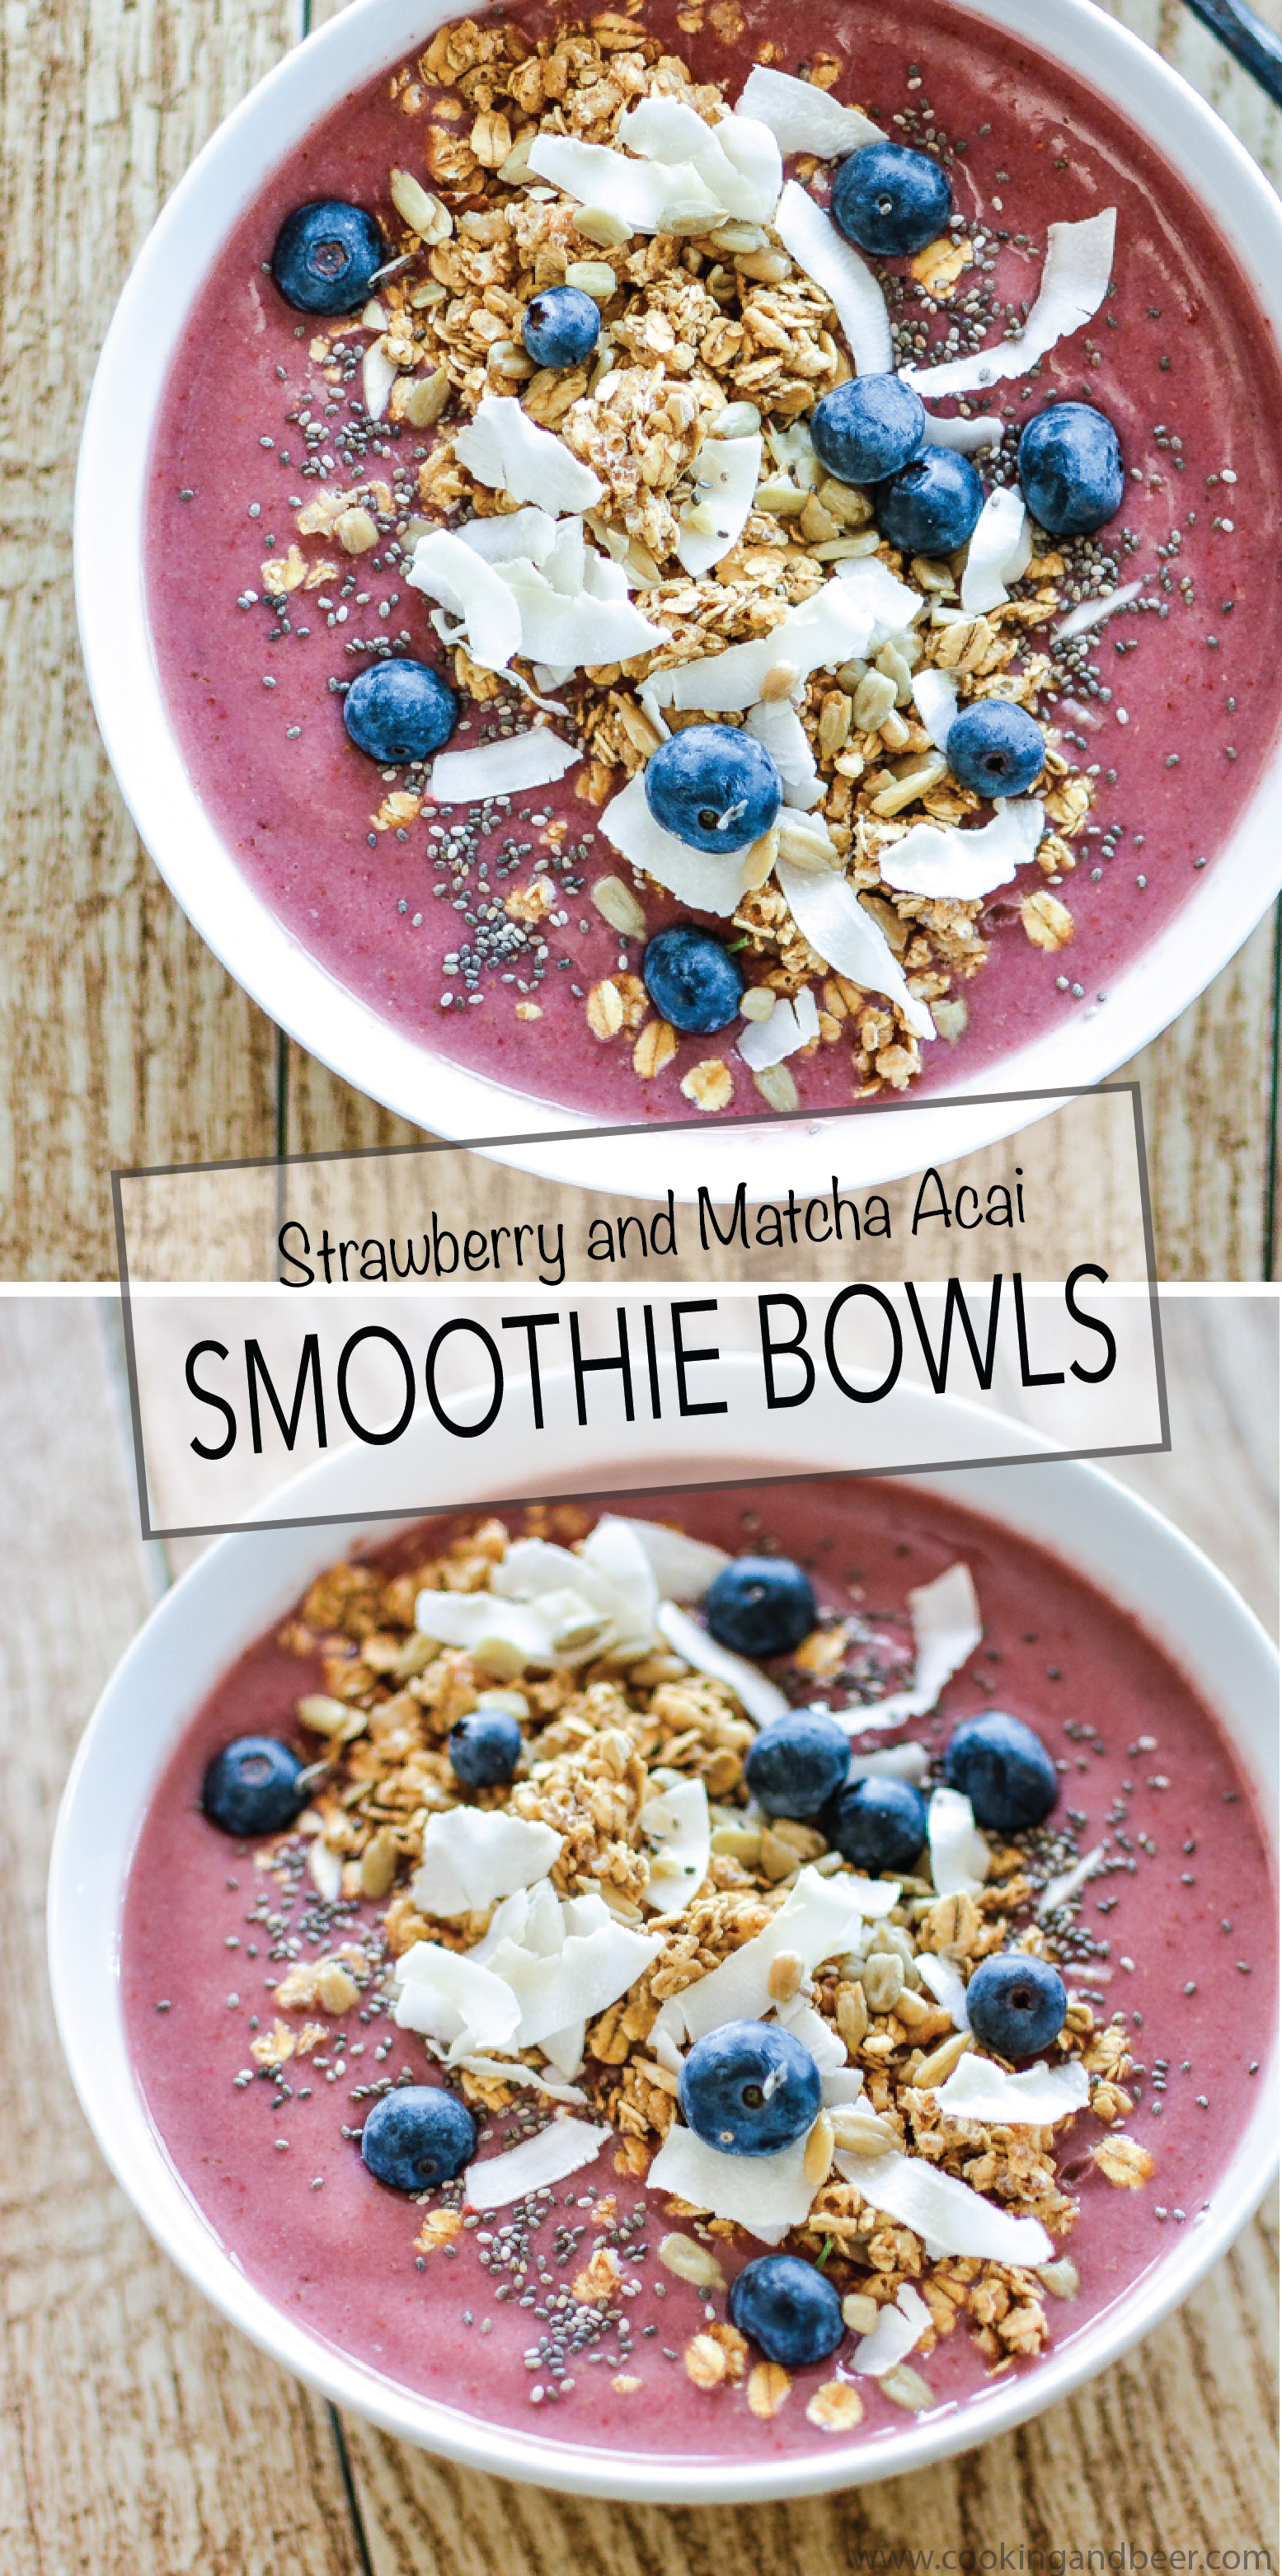 Recipe for Strawberry and Matcha Tea, Acai Smoothie Bowls are a quick breakfast that's wholesome, healthy and completely satisfying! | www.cookingandbeer.com